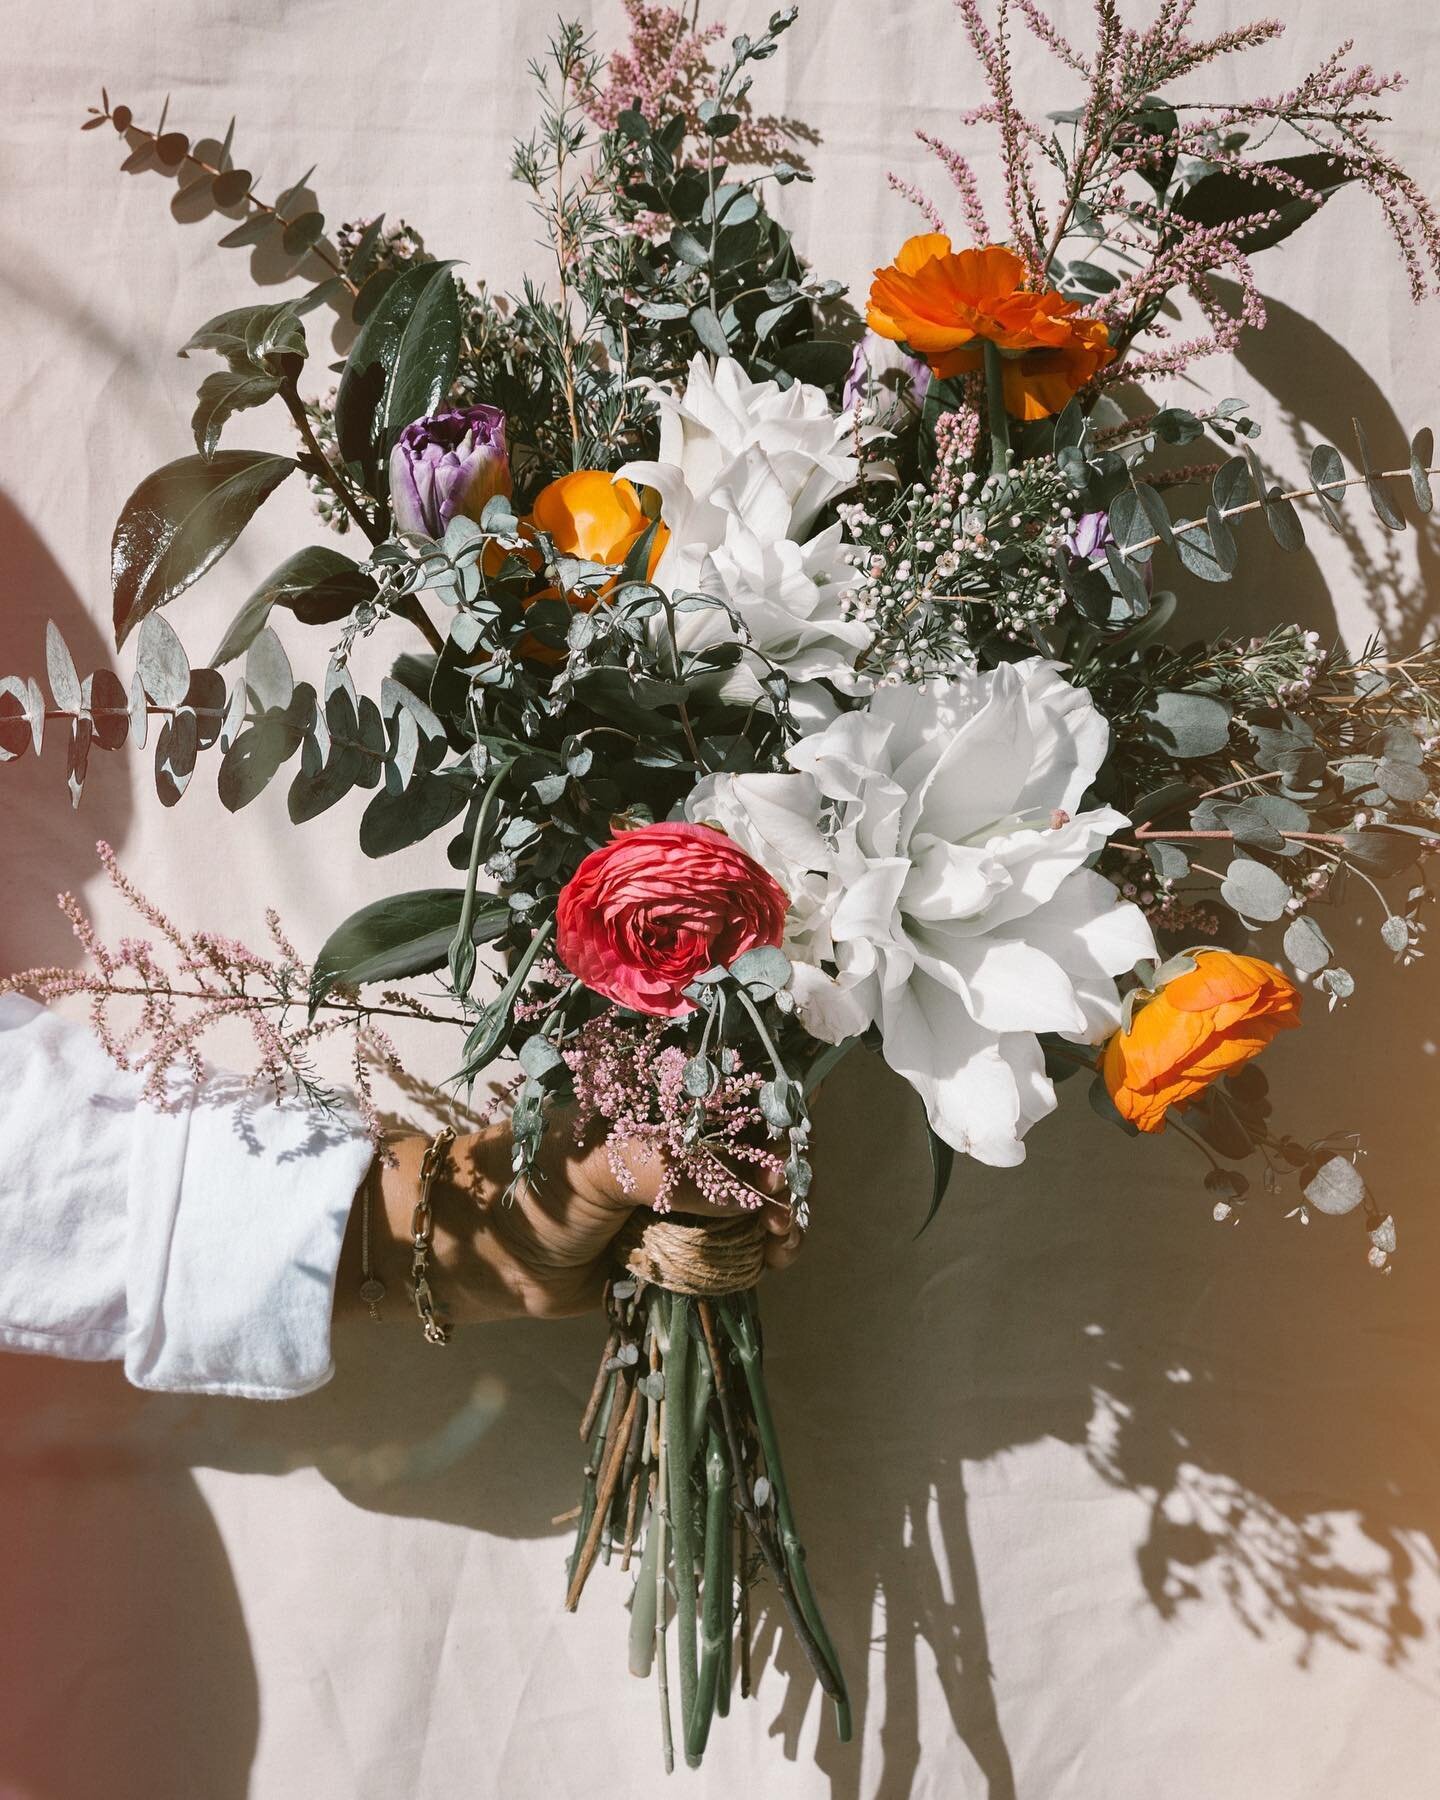 If you want to change the world, go home and love your family.
-
Now through April 30th, we are offering a limited quantity of thoughtfully designed 20 stem mother&rsquo;s day bouquets.
-
Pick-up will be taking place on May 9th from 8AM-1PM at 1501 M